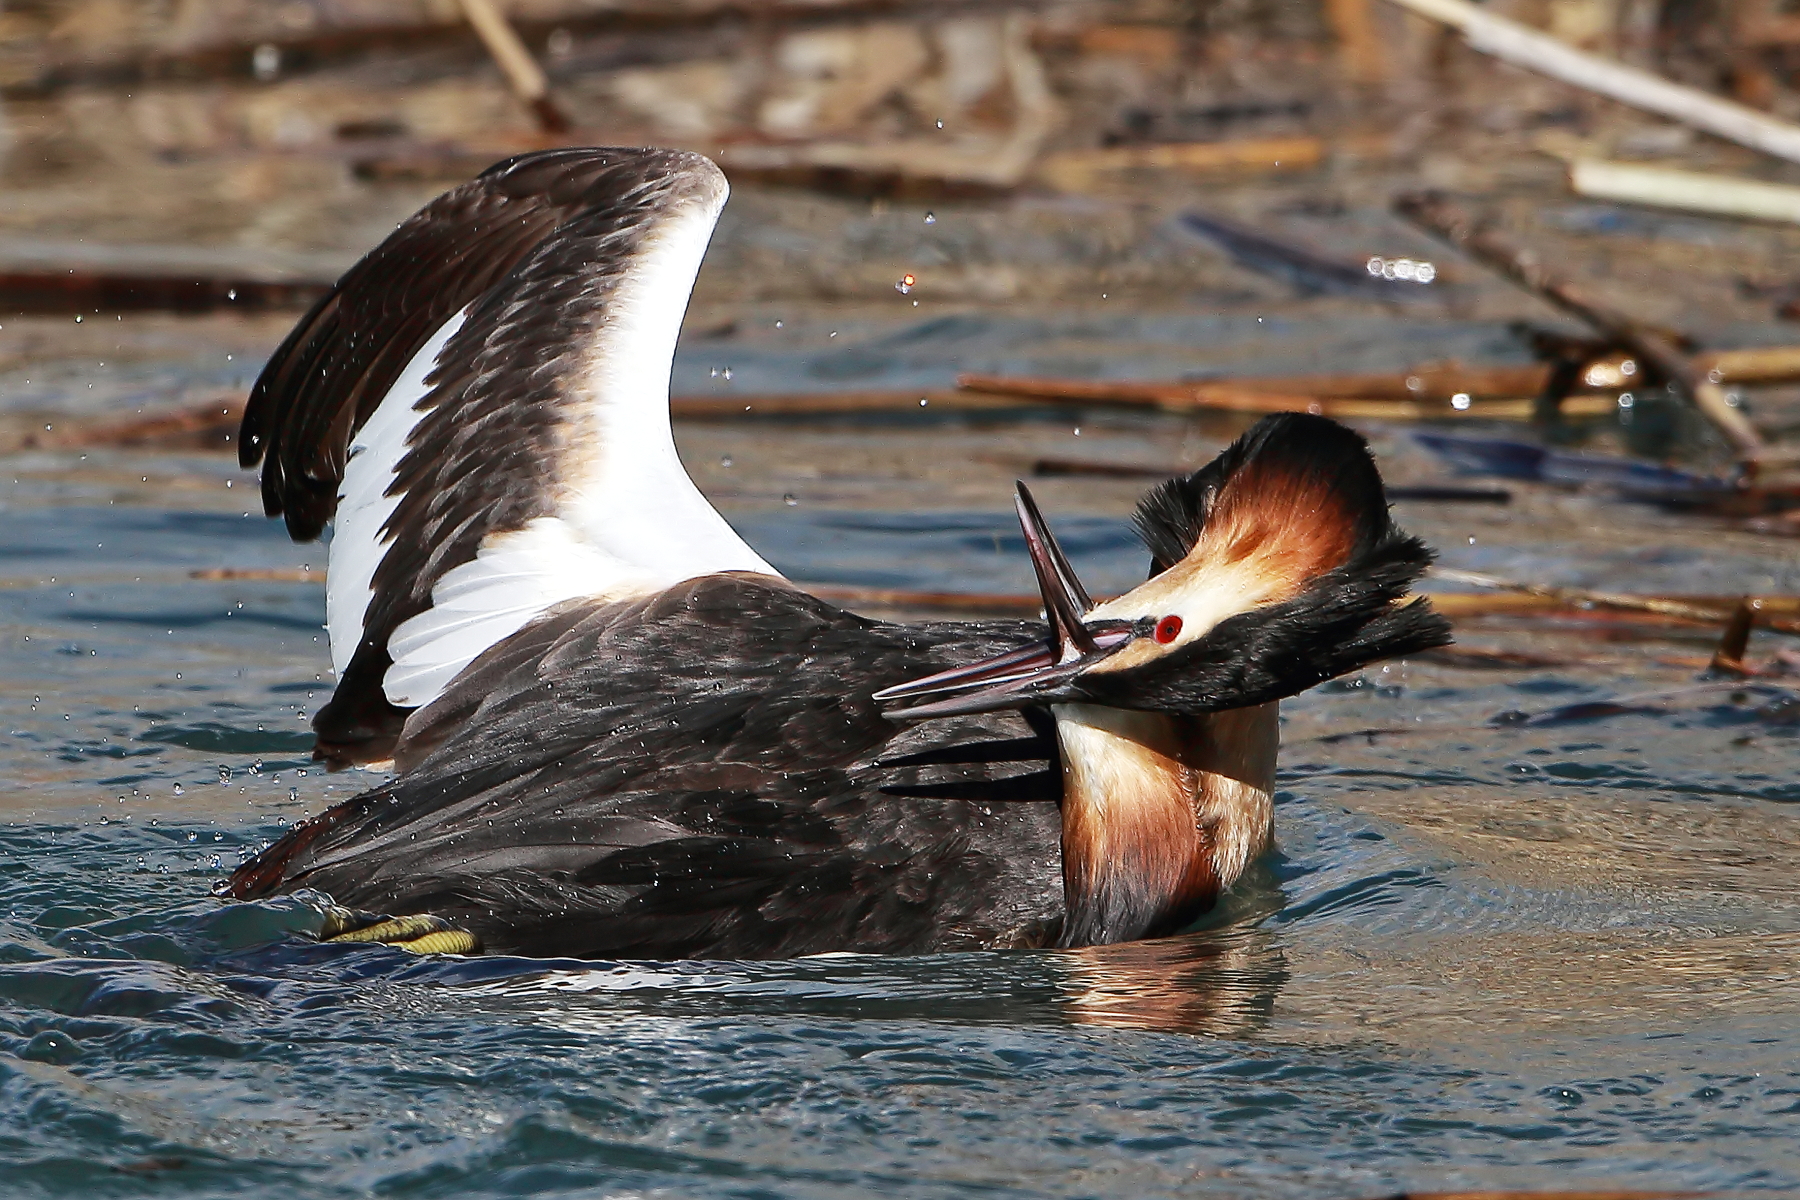 A very hard fight between grebes....